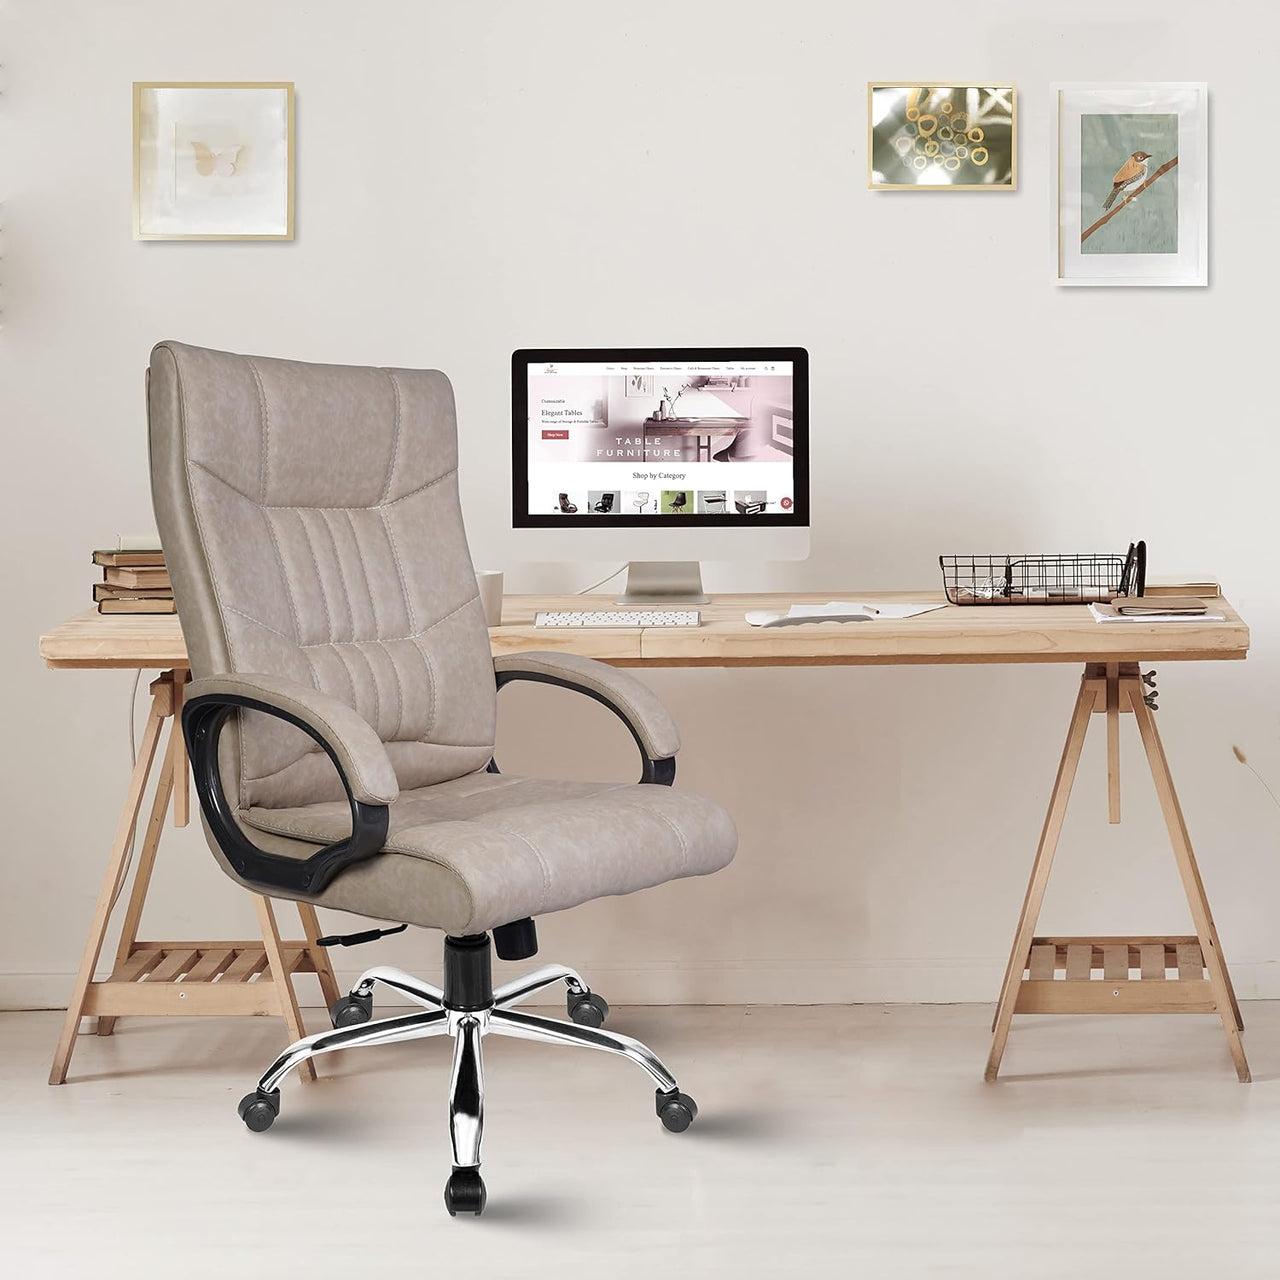 Lio Leatherette Executive High Back Revolving Office Chair (Ivory)